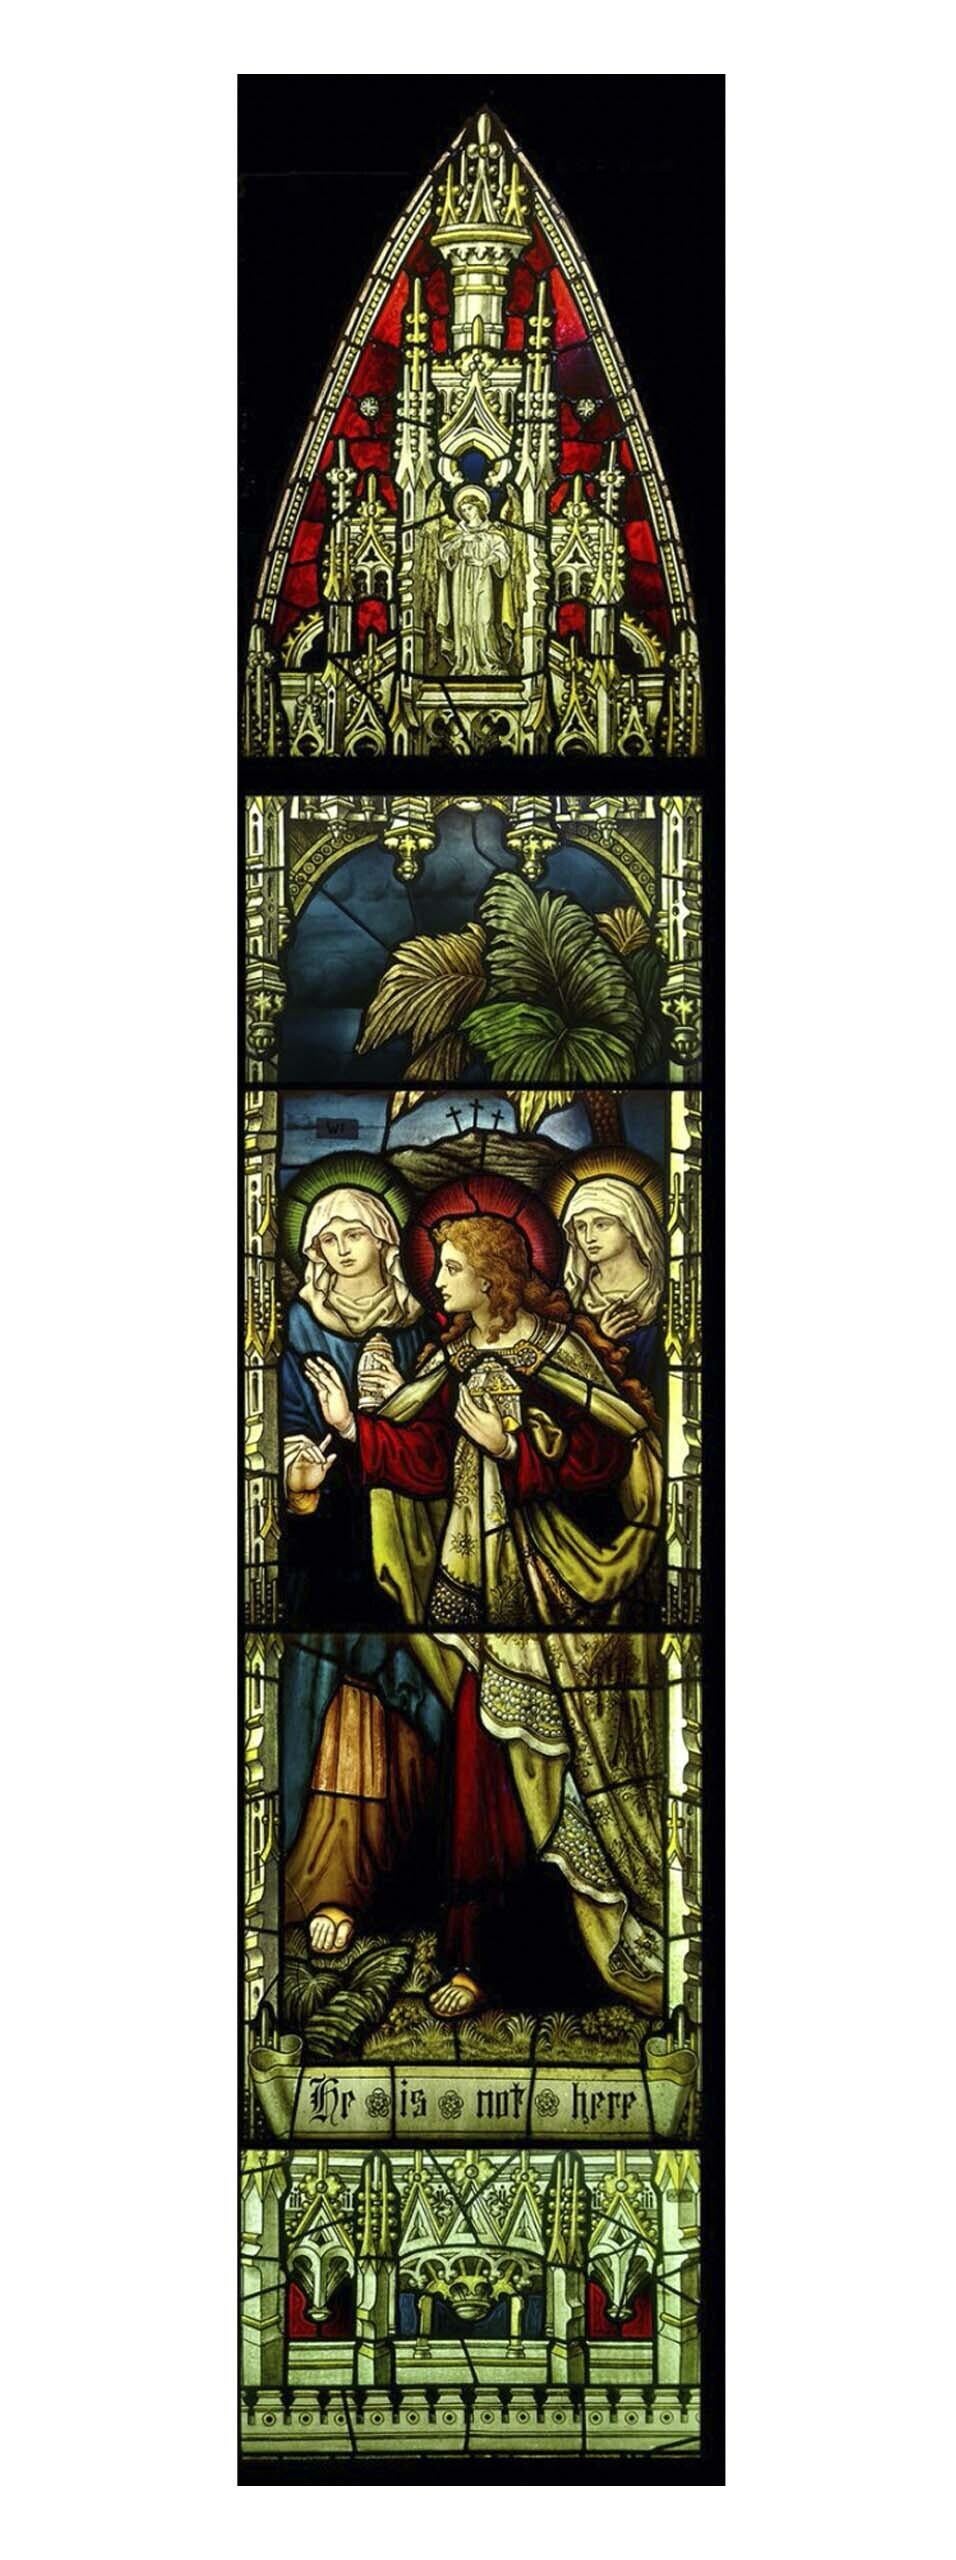 Antique Religious Stained Glass Window. It was designed and built by the Atkinson Brothers. Three of the Atkinson Brothers (William, Frederick and Albert) became stained glass window artists. They started the business in 1876.